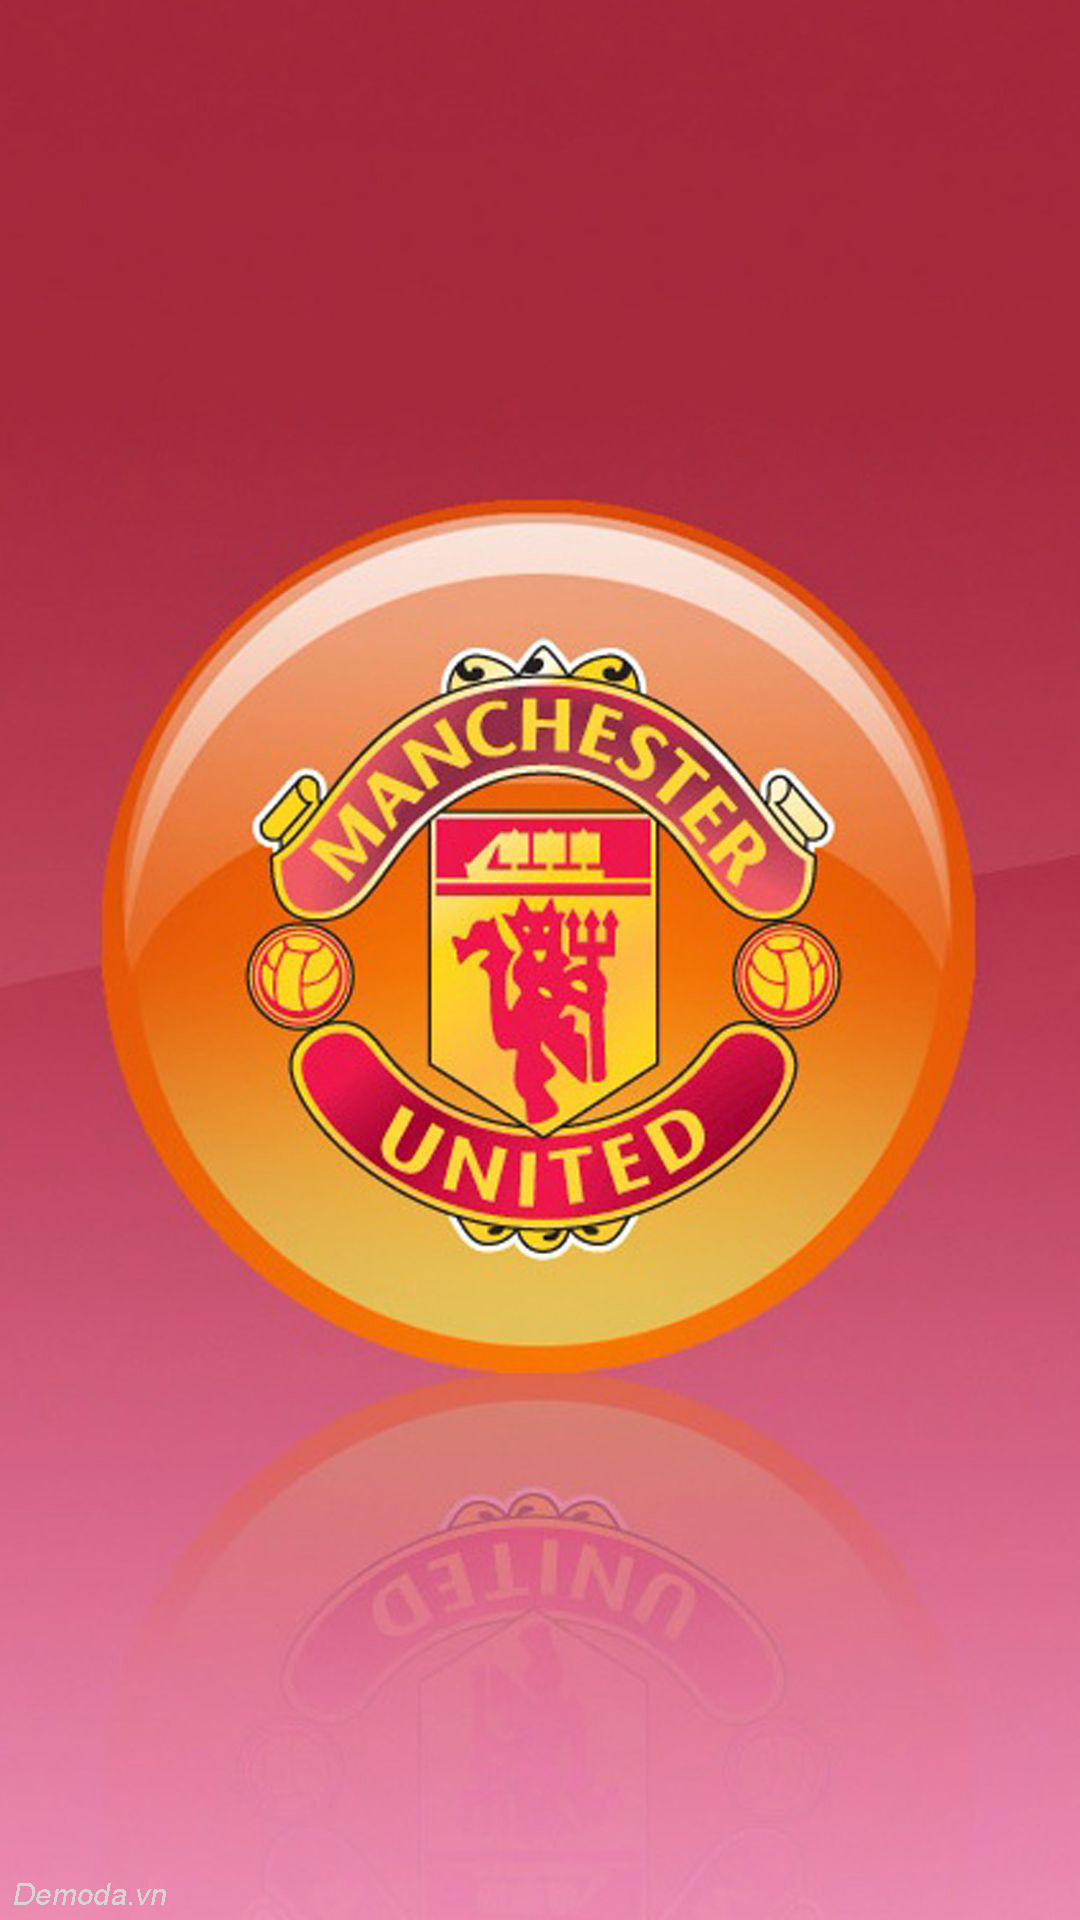 Manchester United FC  Wikipedia tiếng Việt